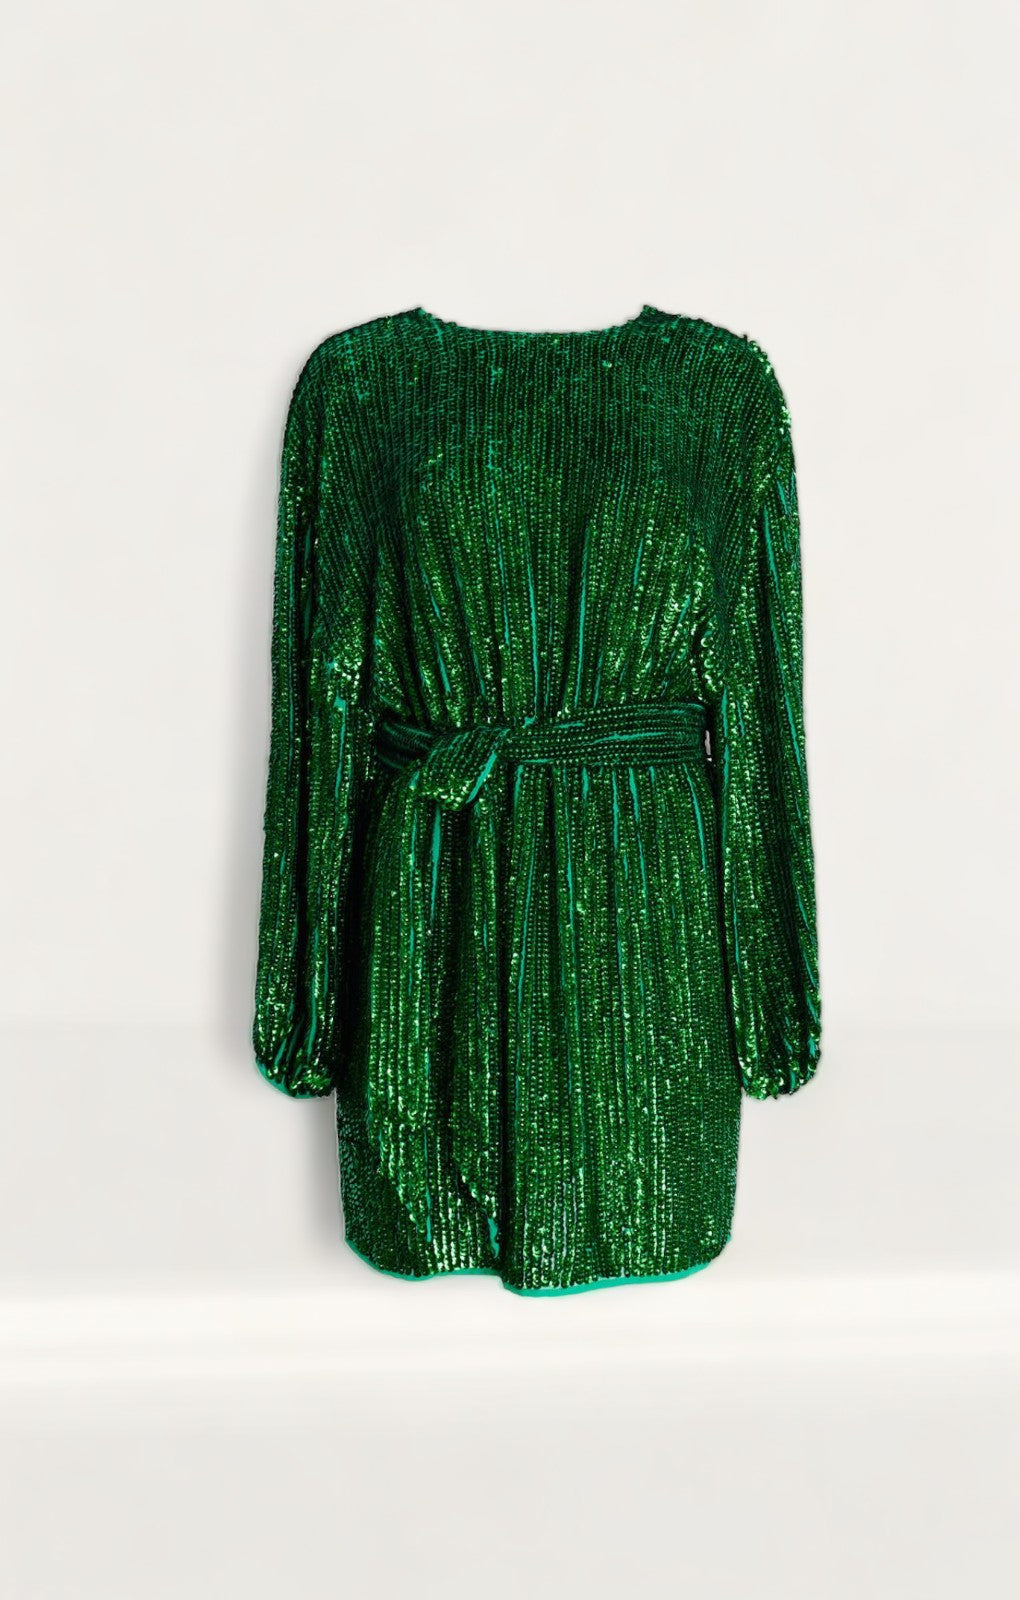 Warehouse Hand Sequined Belted Mini Dress product image